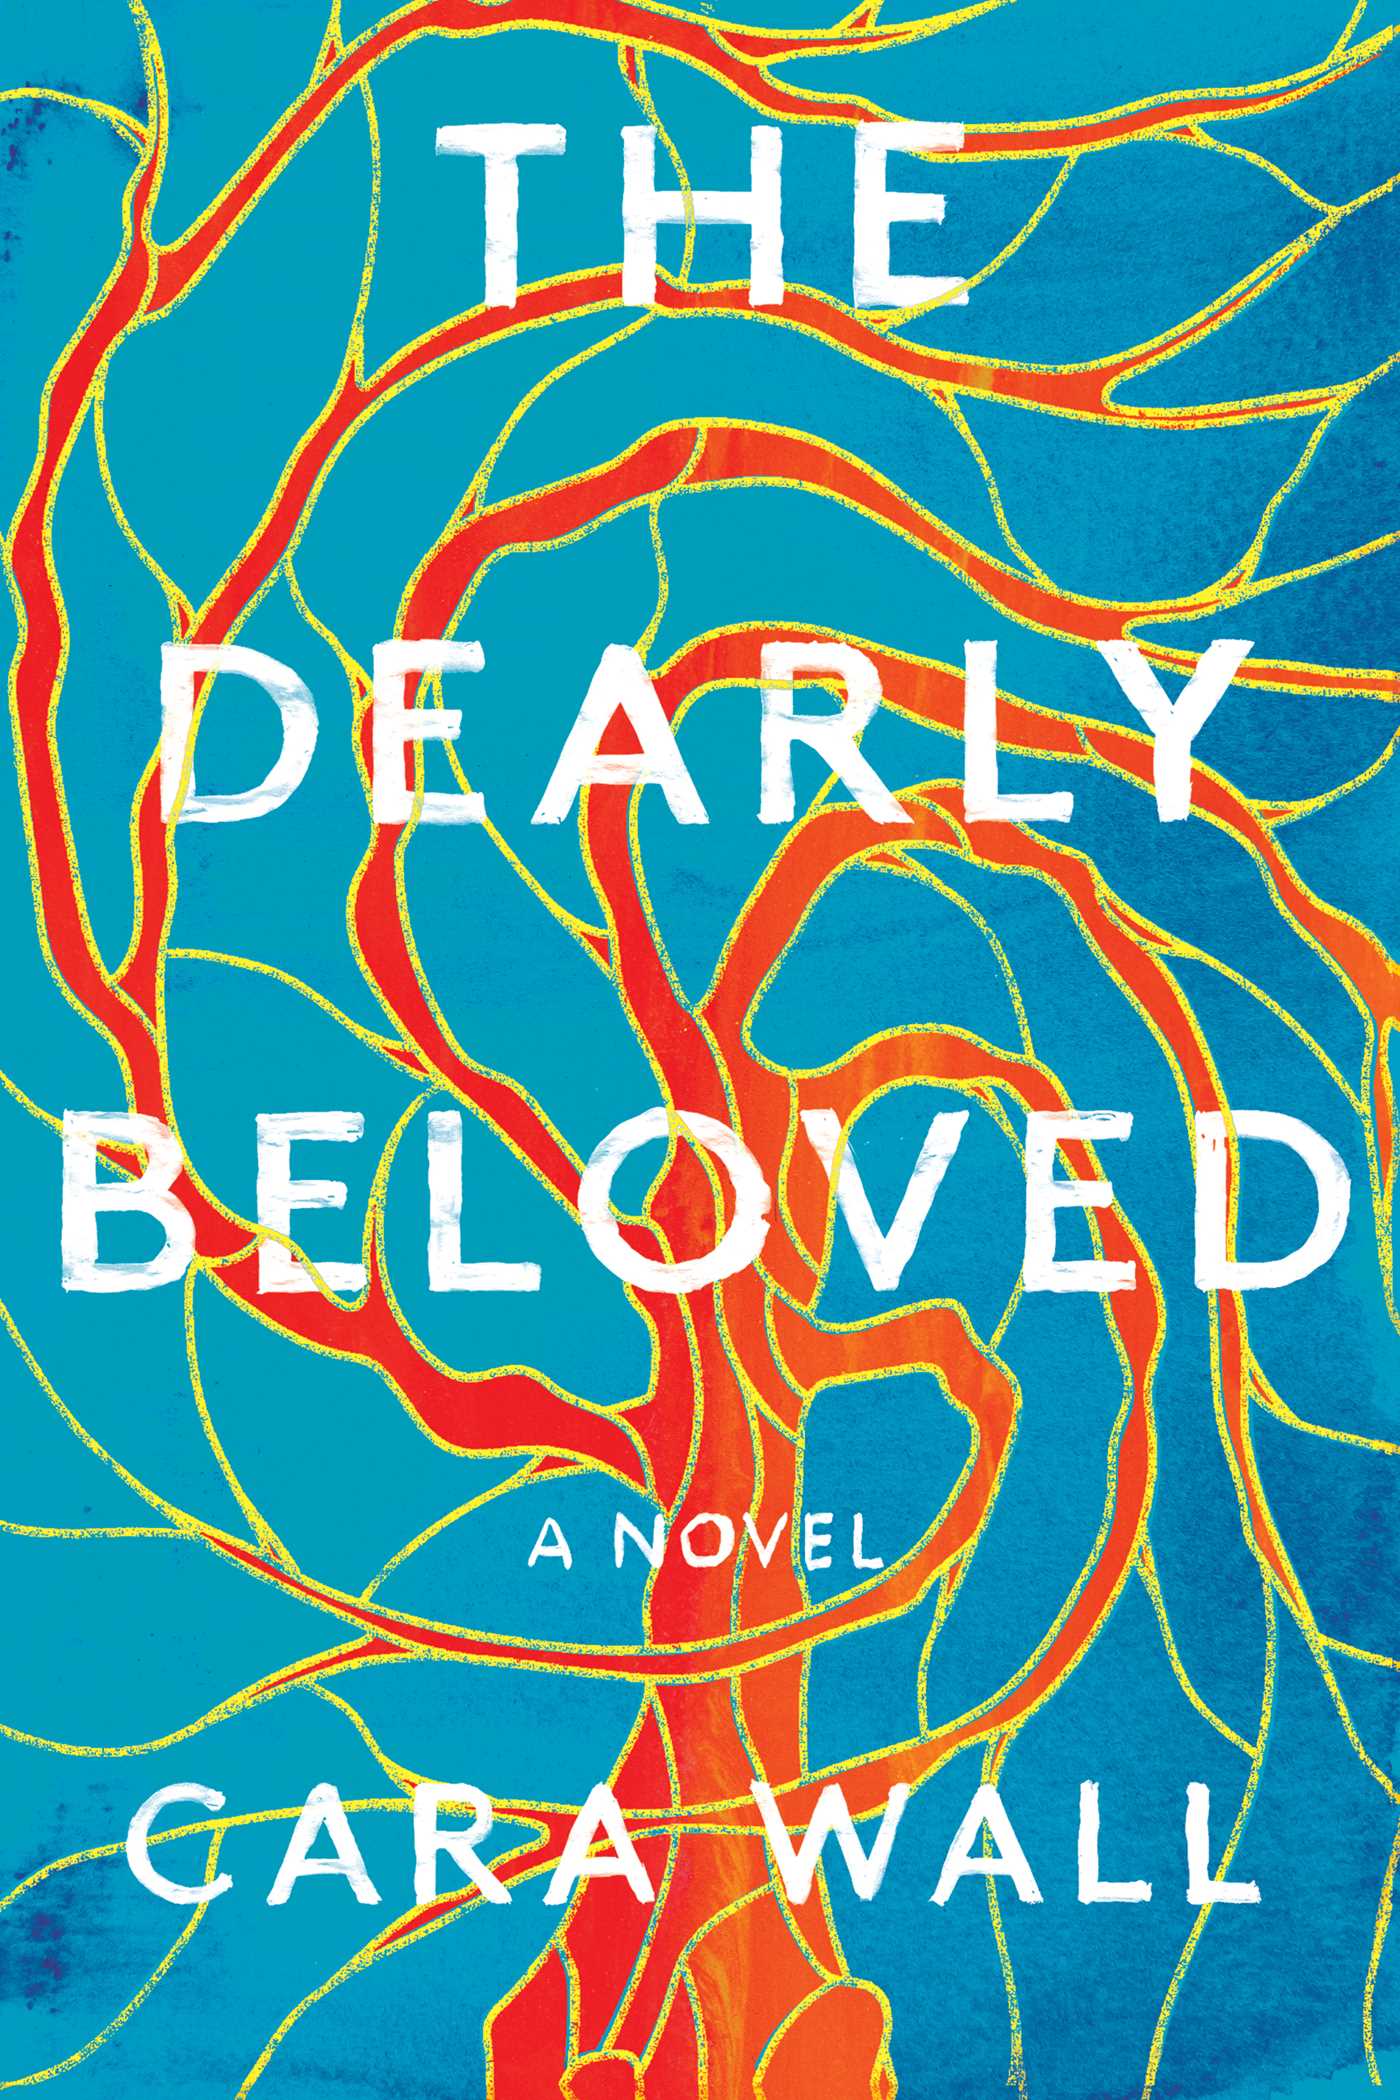 Image for "The Dearly Beloved"